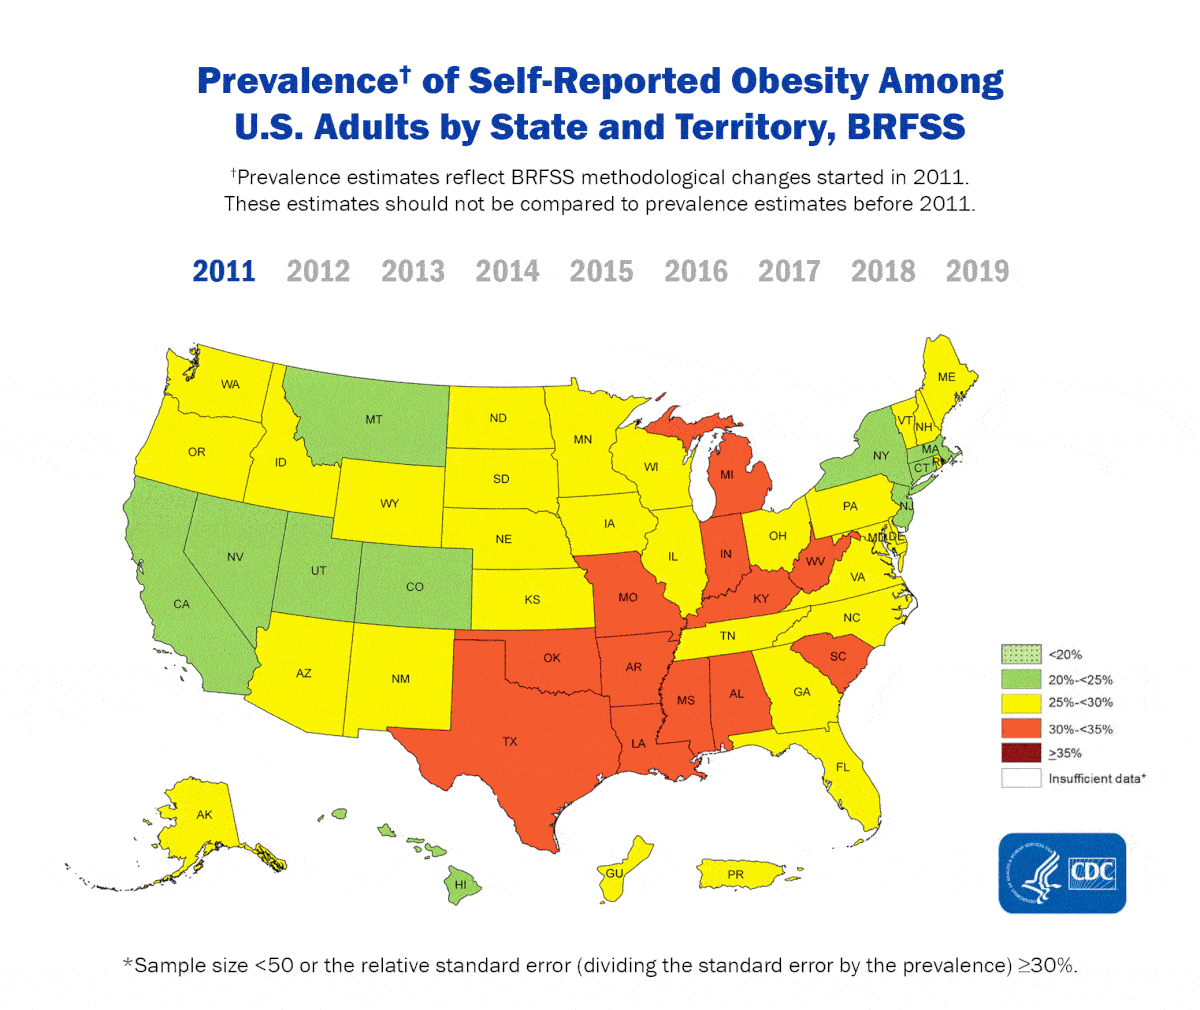 Prevalence of Self-Reported Obesity Among U.S. Adults by State and Territory, 2011-2019